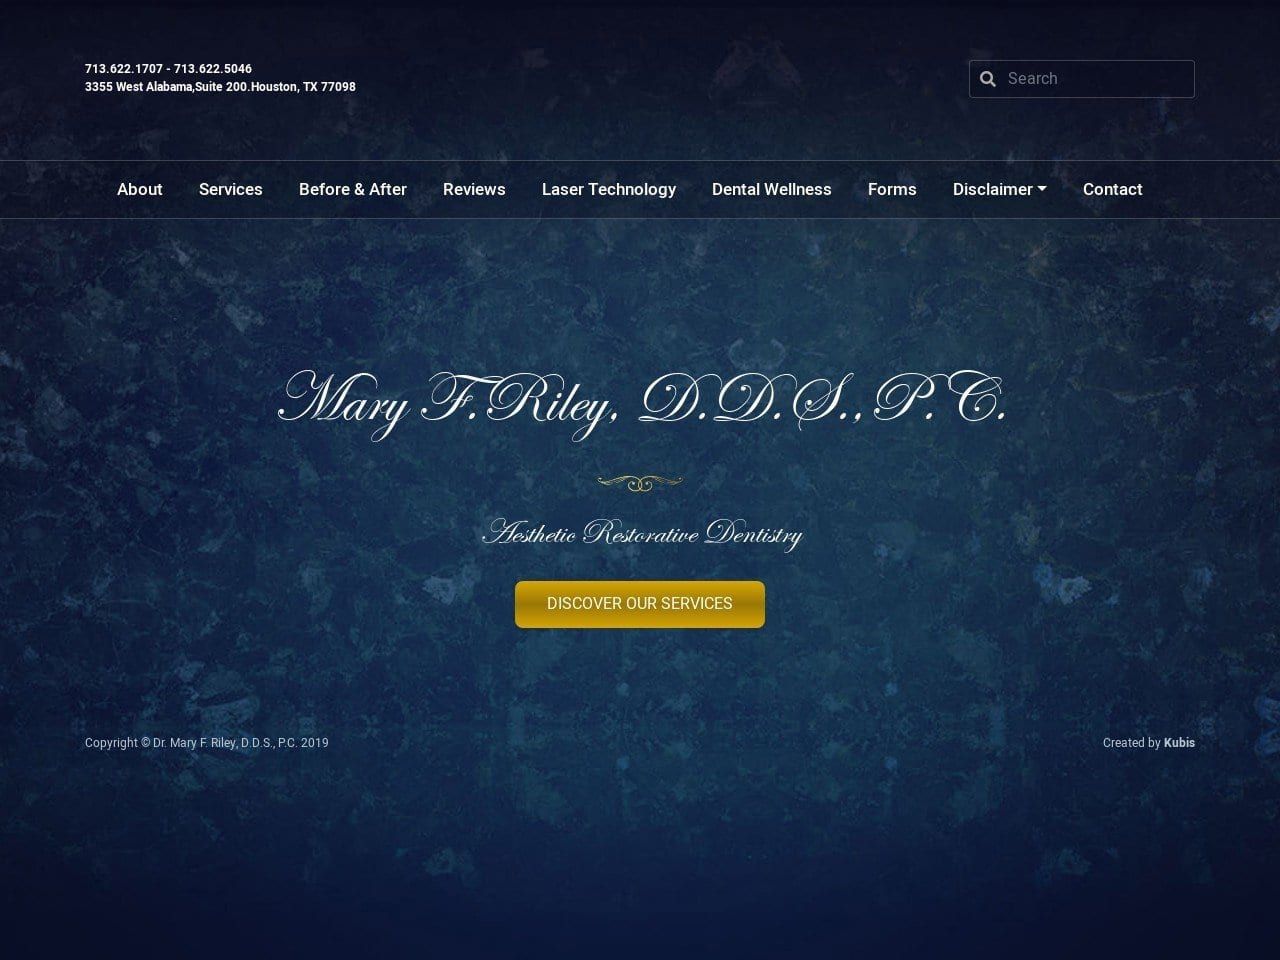 Dr. Mary F. Riley D.D.S. P.C Website Screenshot from maryrileydds.com